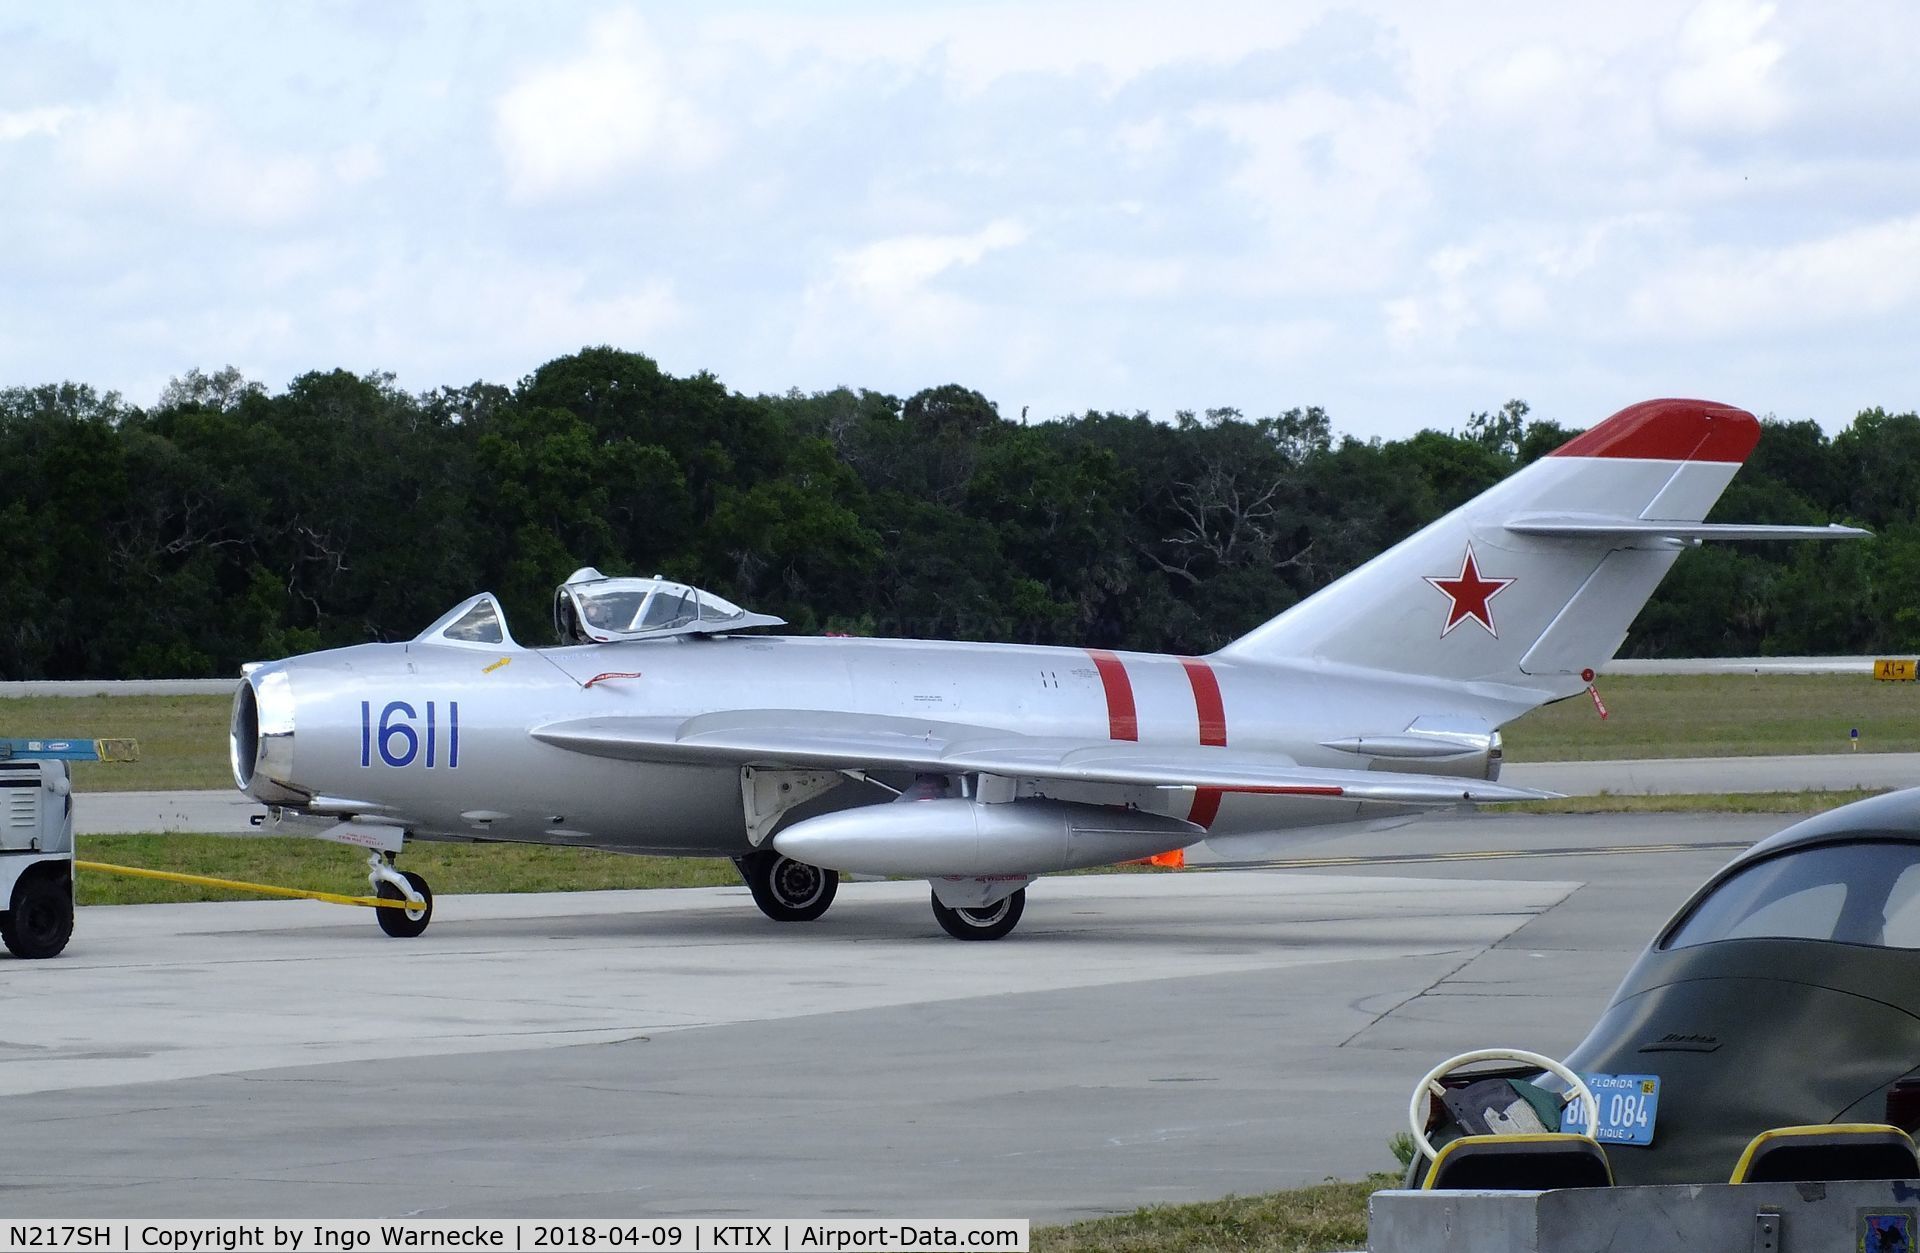 N217SH, 1959 PZL-Mielec Lim-5 (MiG-17F) C/N 1C1611, PZL-Mielec Lim-5 (MiG-17F FRESCO) at Space Coast Regional Airport, Titusville (the day after Space Coast Warbird AirShow 2018)